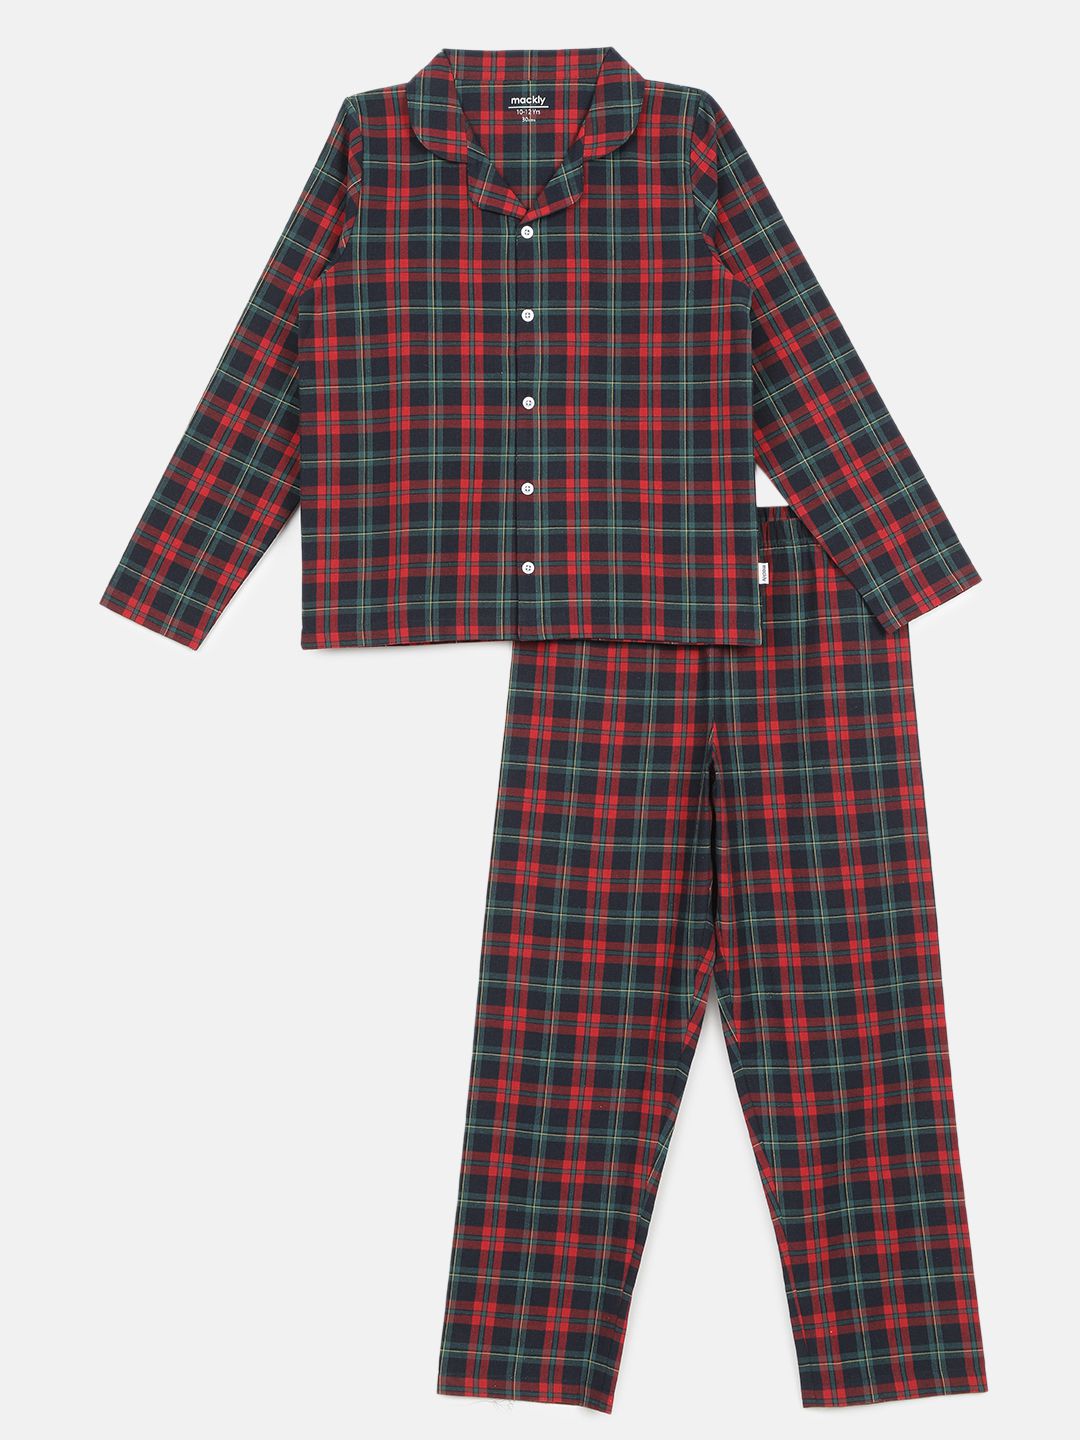     			Mackly - Red Cotton Boys Shirt & Pants ( Pack of 1 )